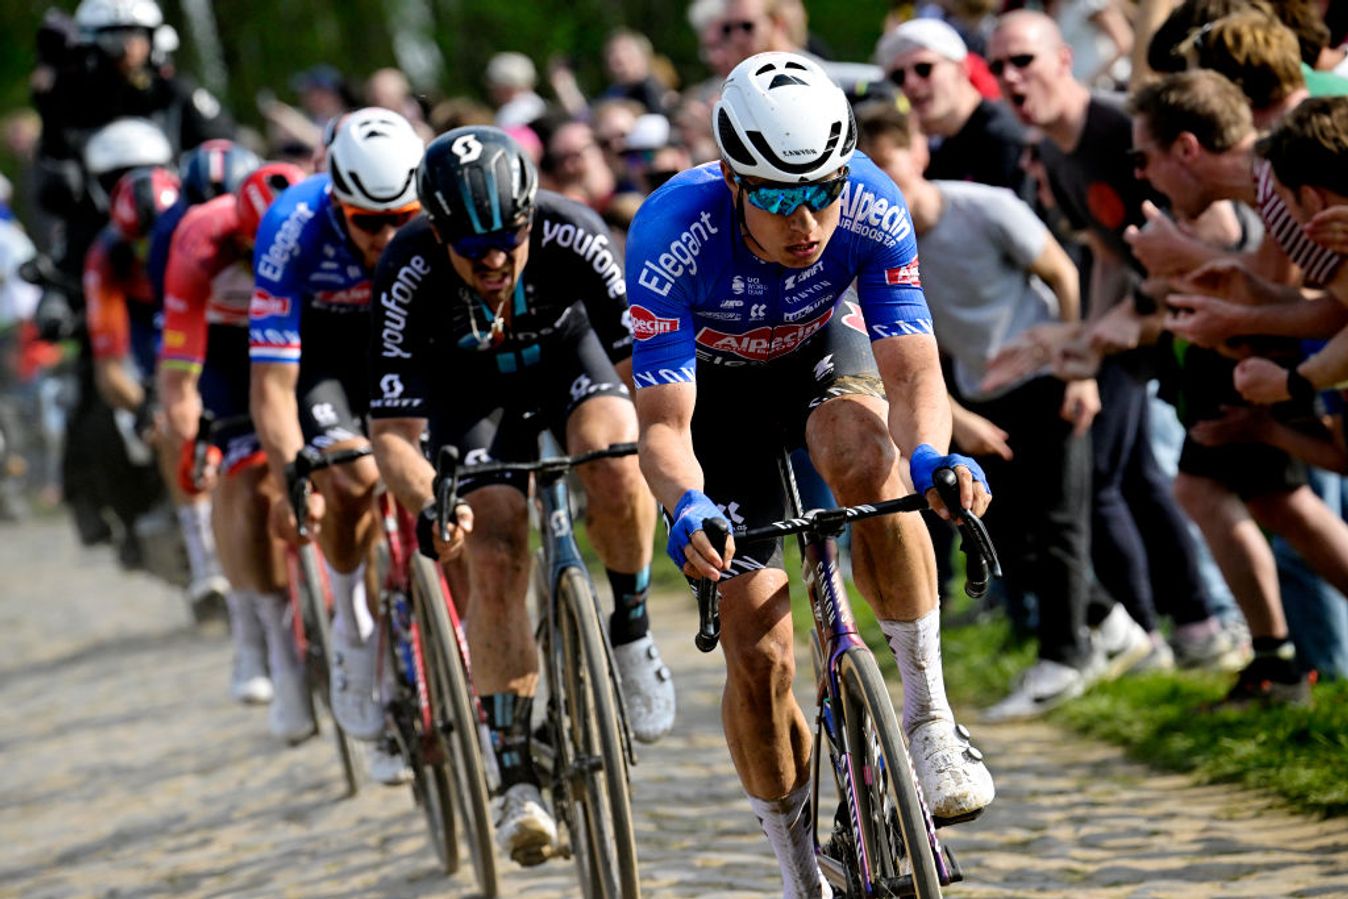 Jasper Philipsen had a stellar ride at the 2023 Paris-Roubaix, showing himself to be more than just a sprinter